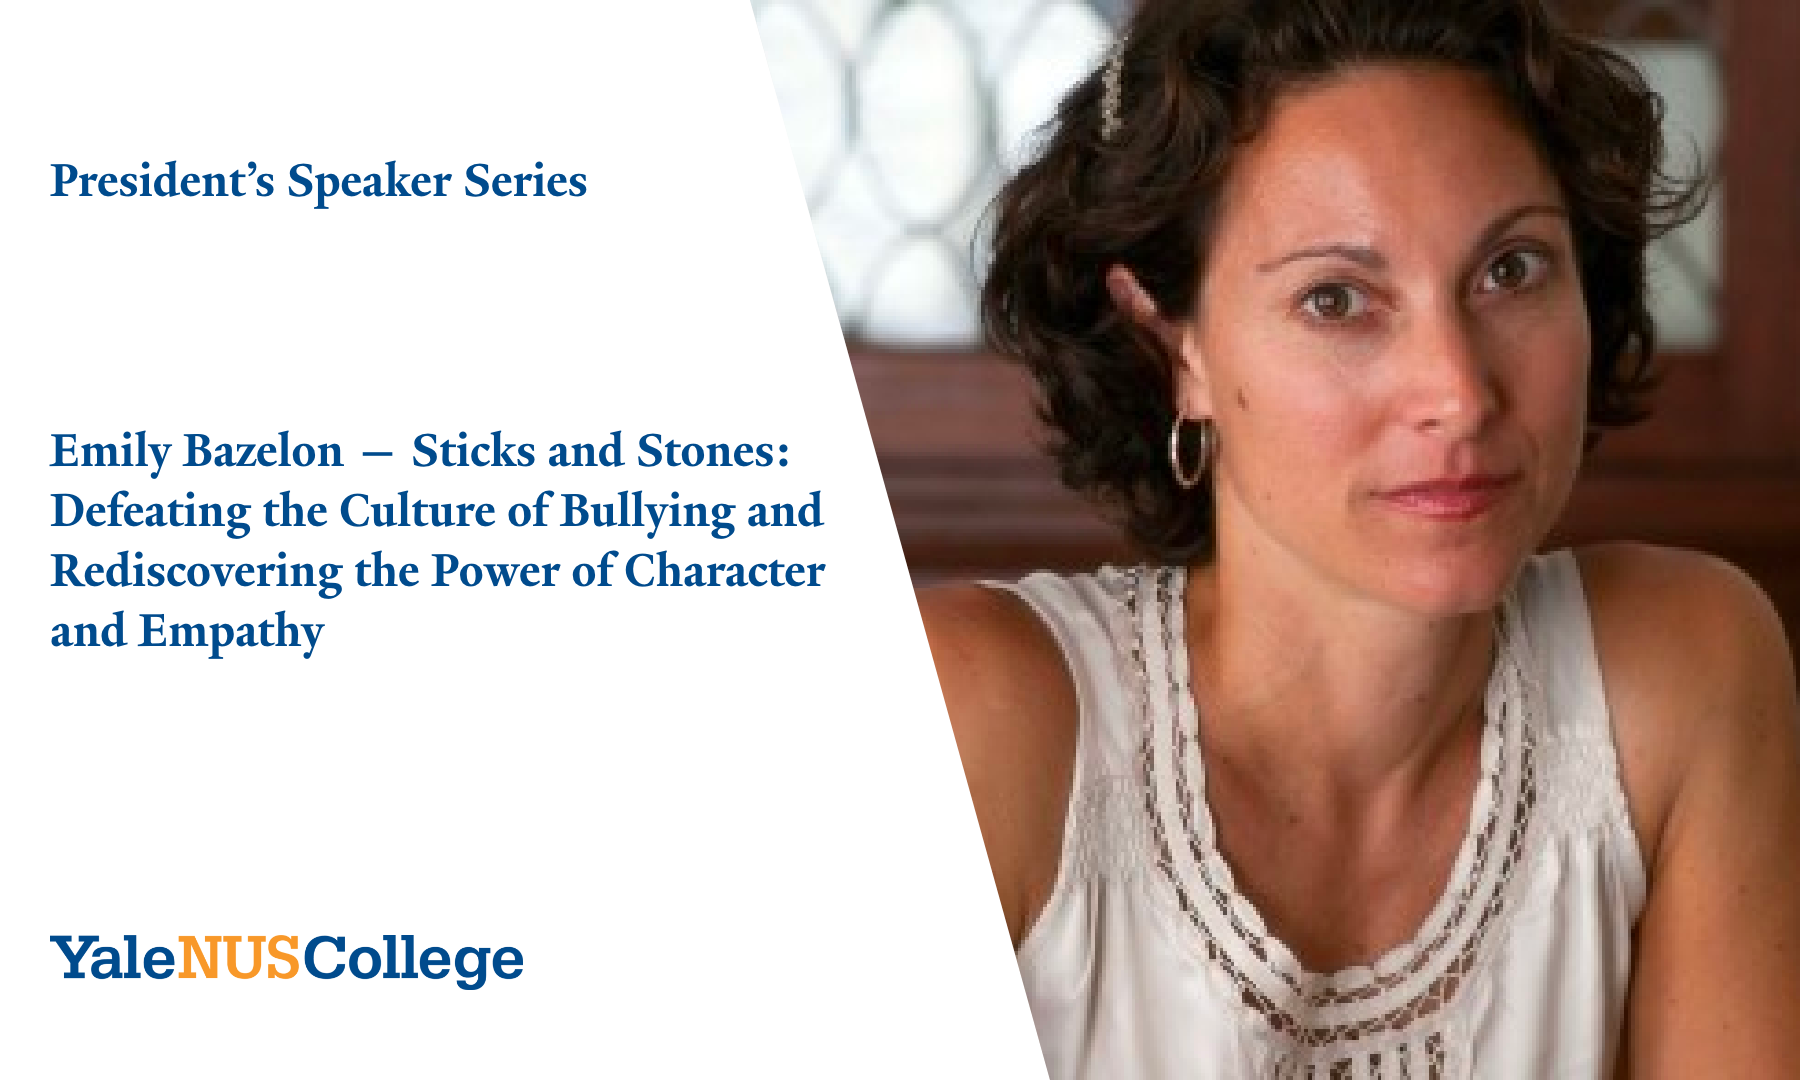 Emily Bazelon -- Sticks and Stones: Defeating the Culture of Bullying and Rediscovering the Power of Character and Empathy